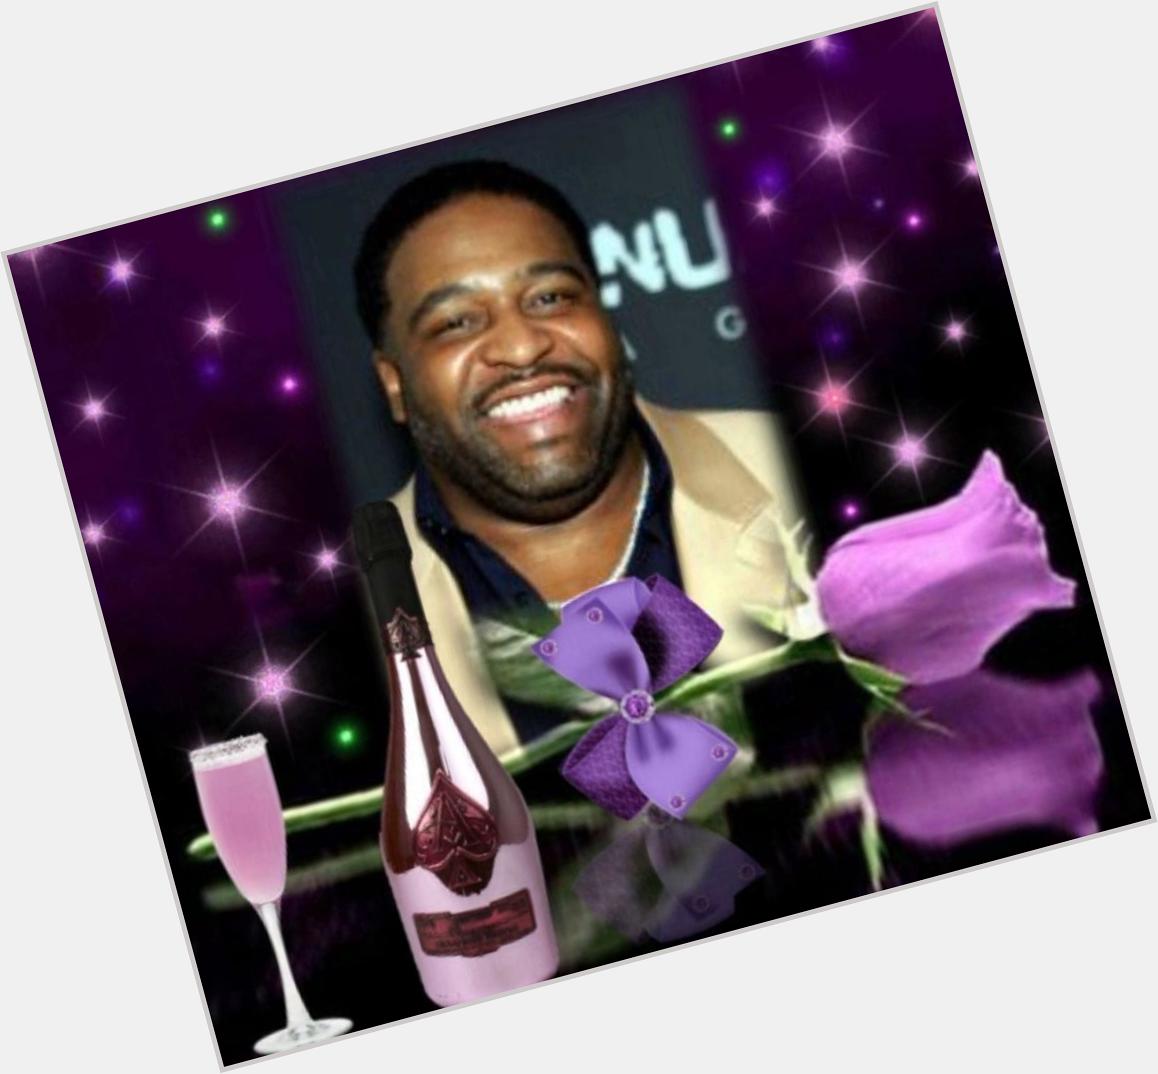 Musical Tribute To Late Gerald Levert Afternoon Soul Cafe.. 1pm-3pm Tune Happy 49th Birthday 